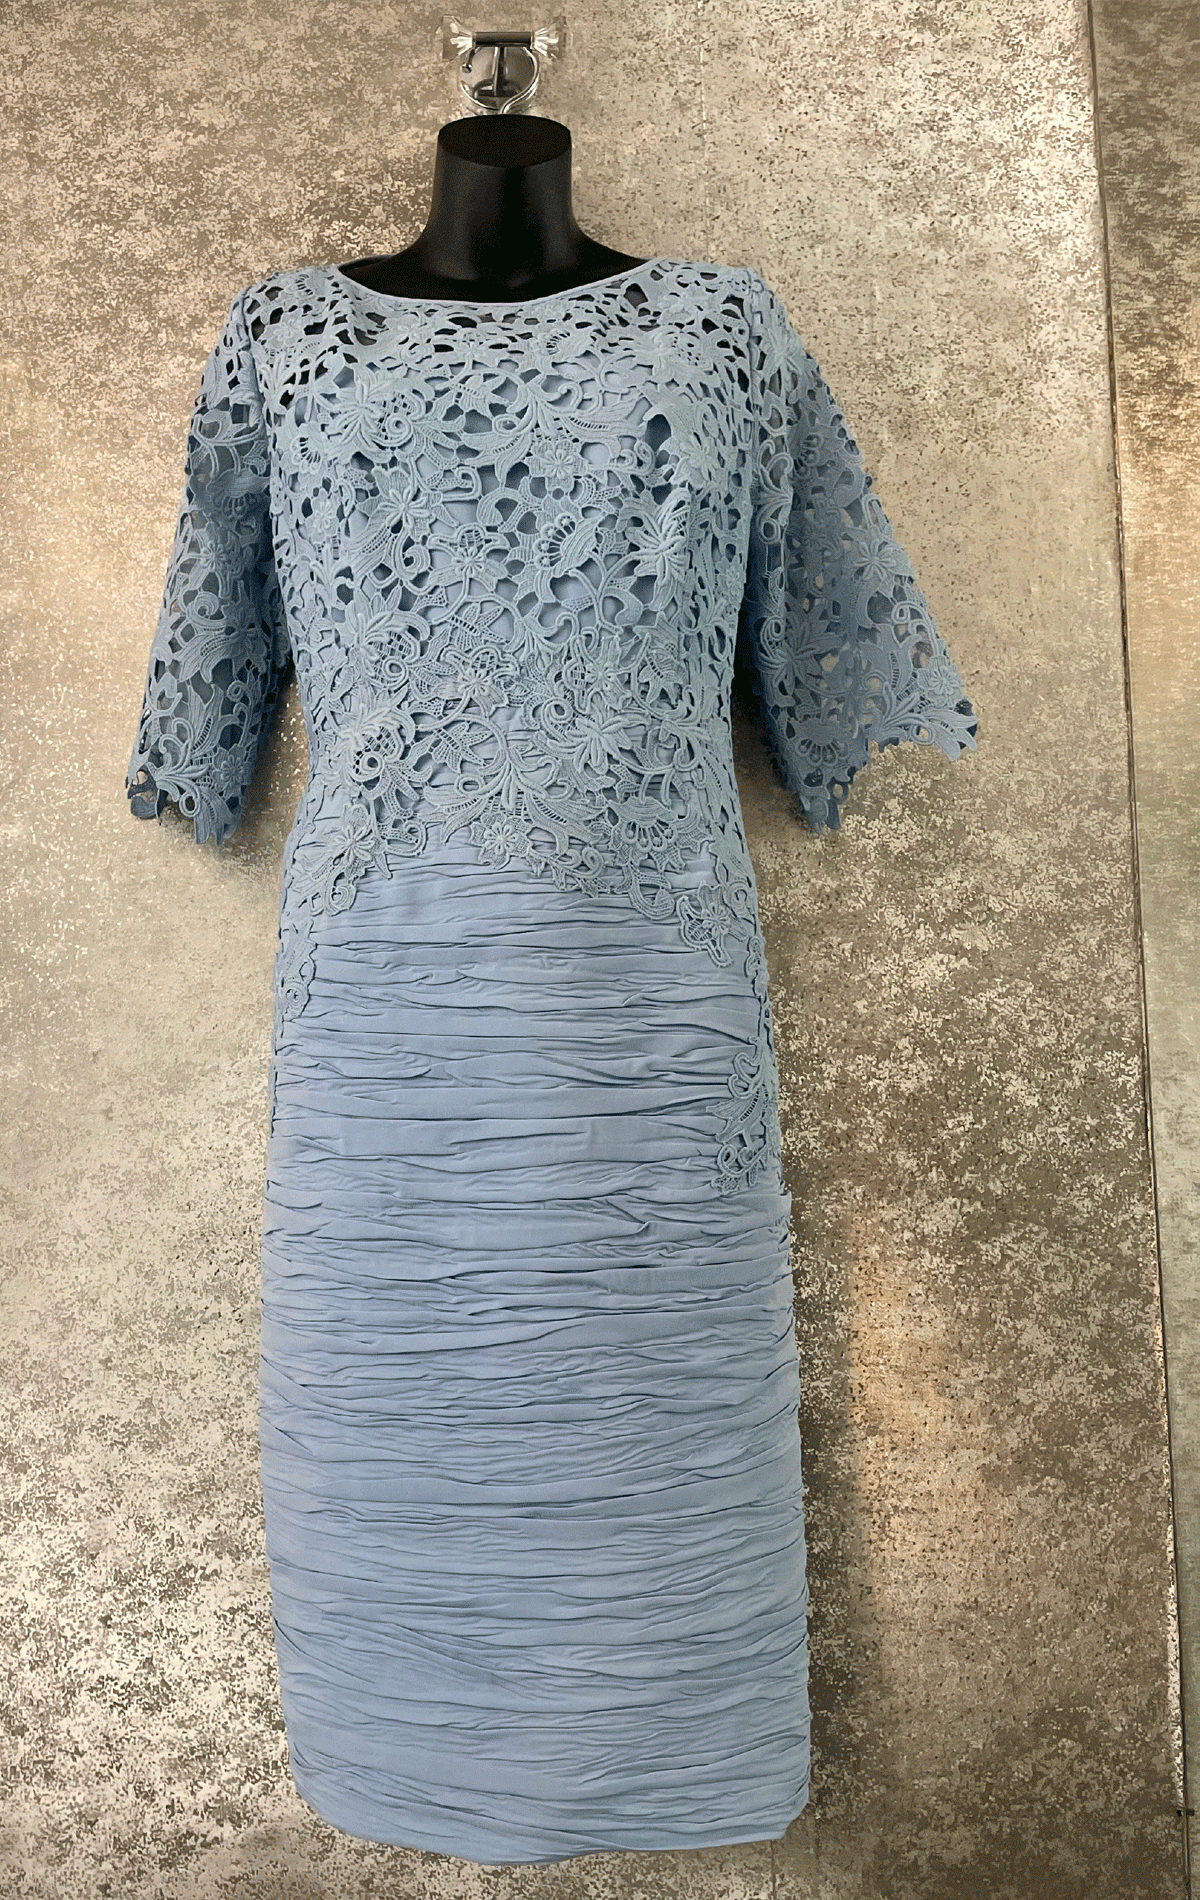 Azul - Size 18 - Cabotine Pale Blue Riuched dress with lace bodice and sleeves - On sale  at Blessings Mother of the bride boutique Brighton East Sussex, BN1 5GG. Telephone: 01273 505766